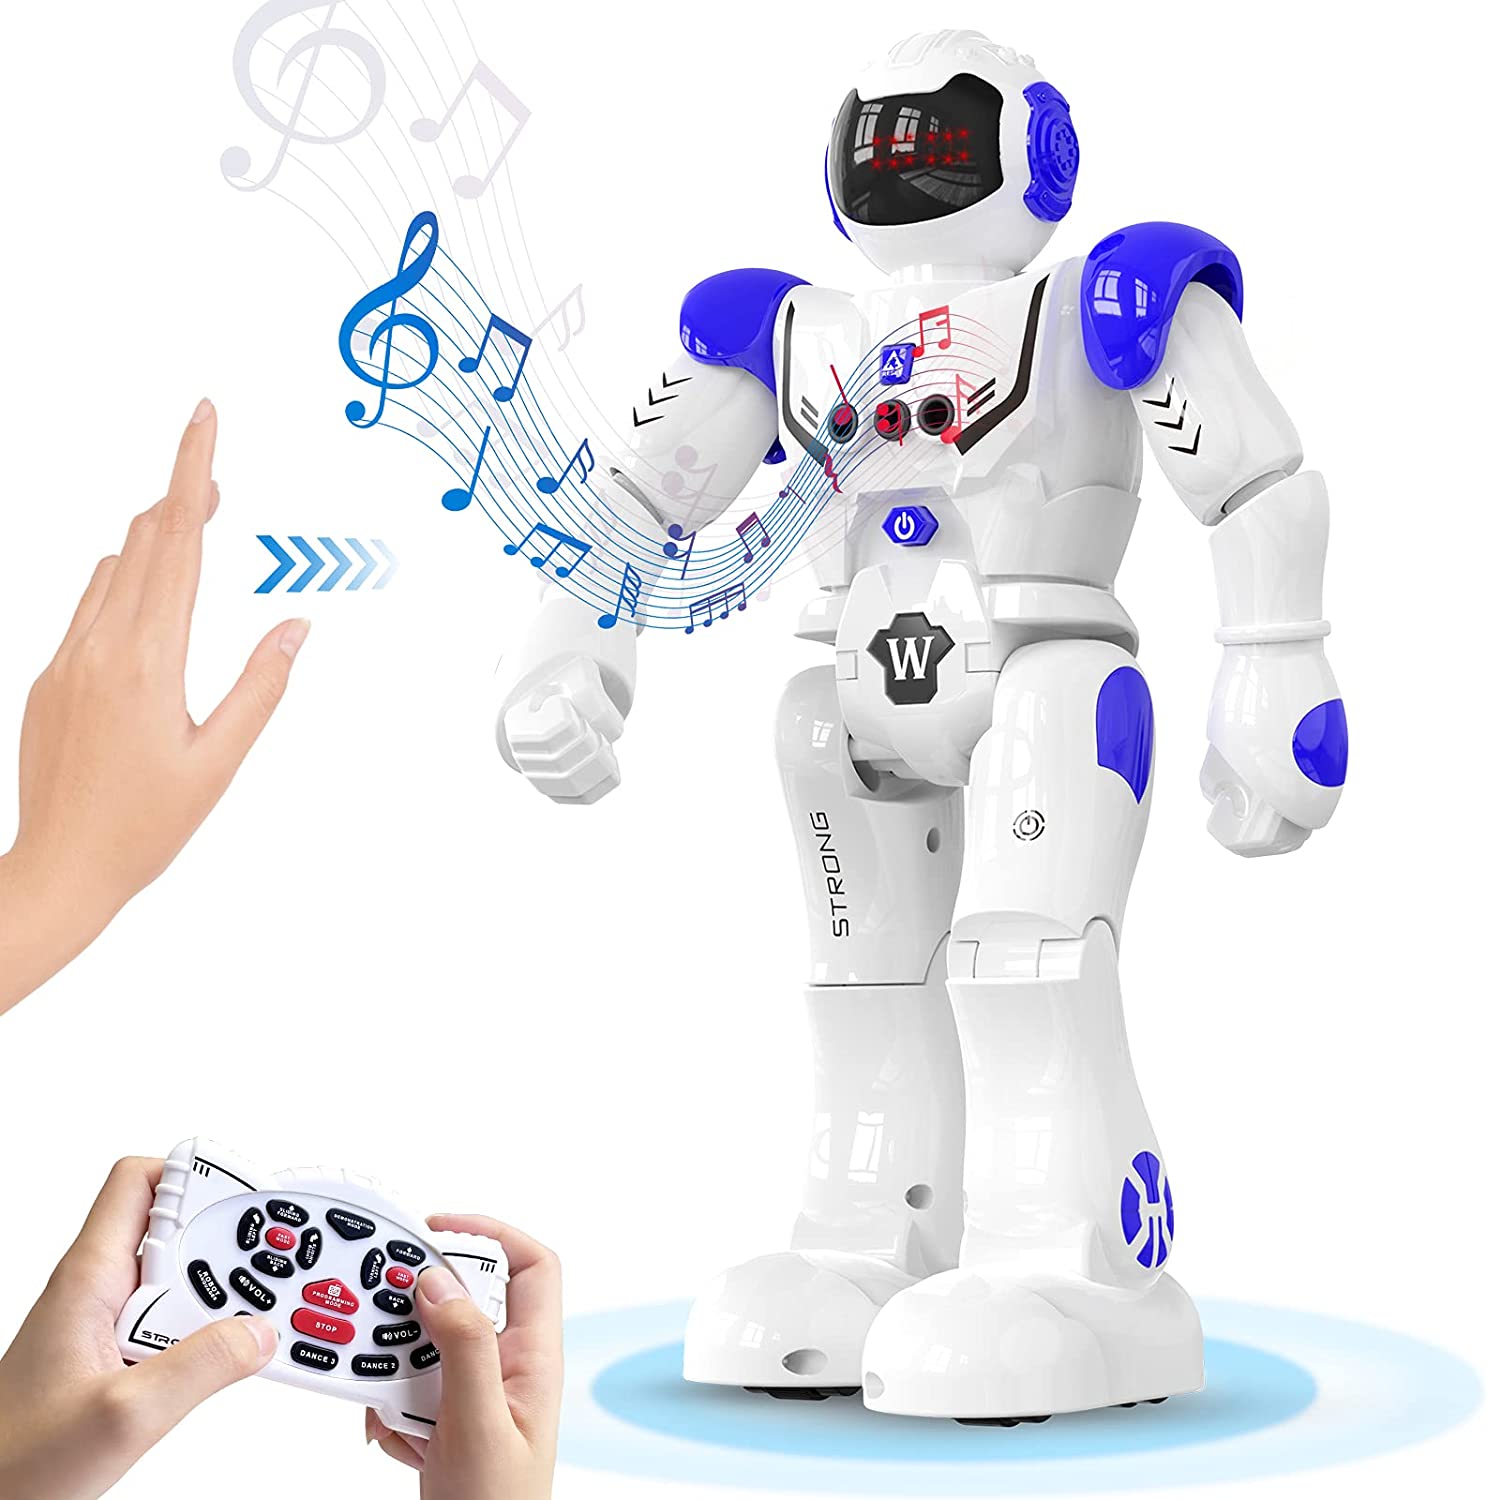 Dancing iDock Intelligent Programmable Robot with Infrared Controller Christmas Stocking Stuffers Birthday Gift for 3-8+ Years Boys Girls Singing Gesture Sensing RC Smart Robot Toys for Kids 